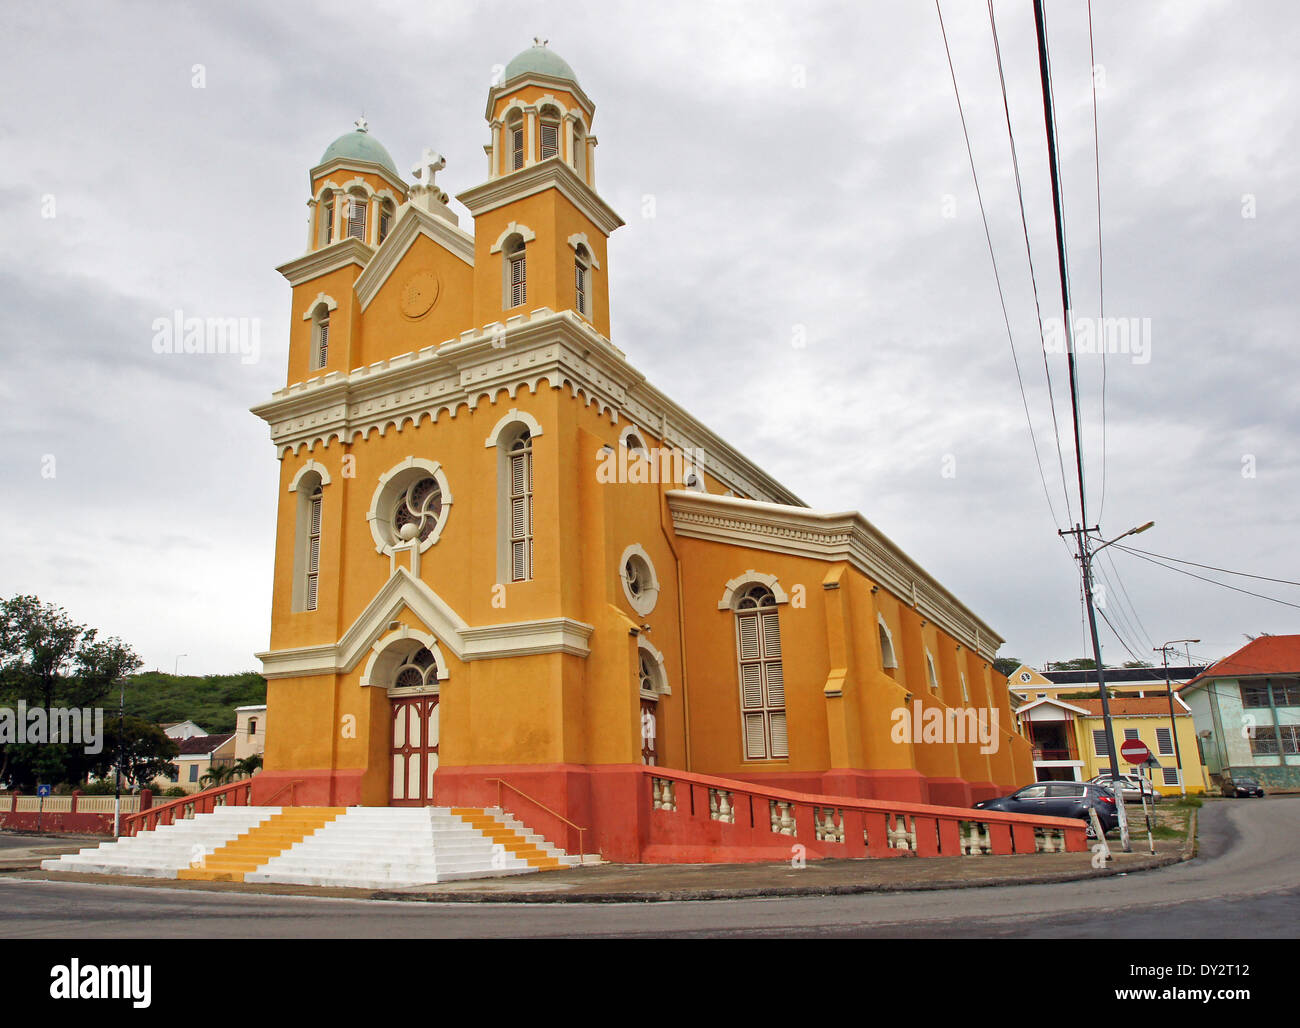 Kathedrale, Willemstad, Curacao, ABC Inseln Stockfoto